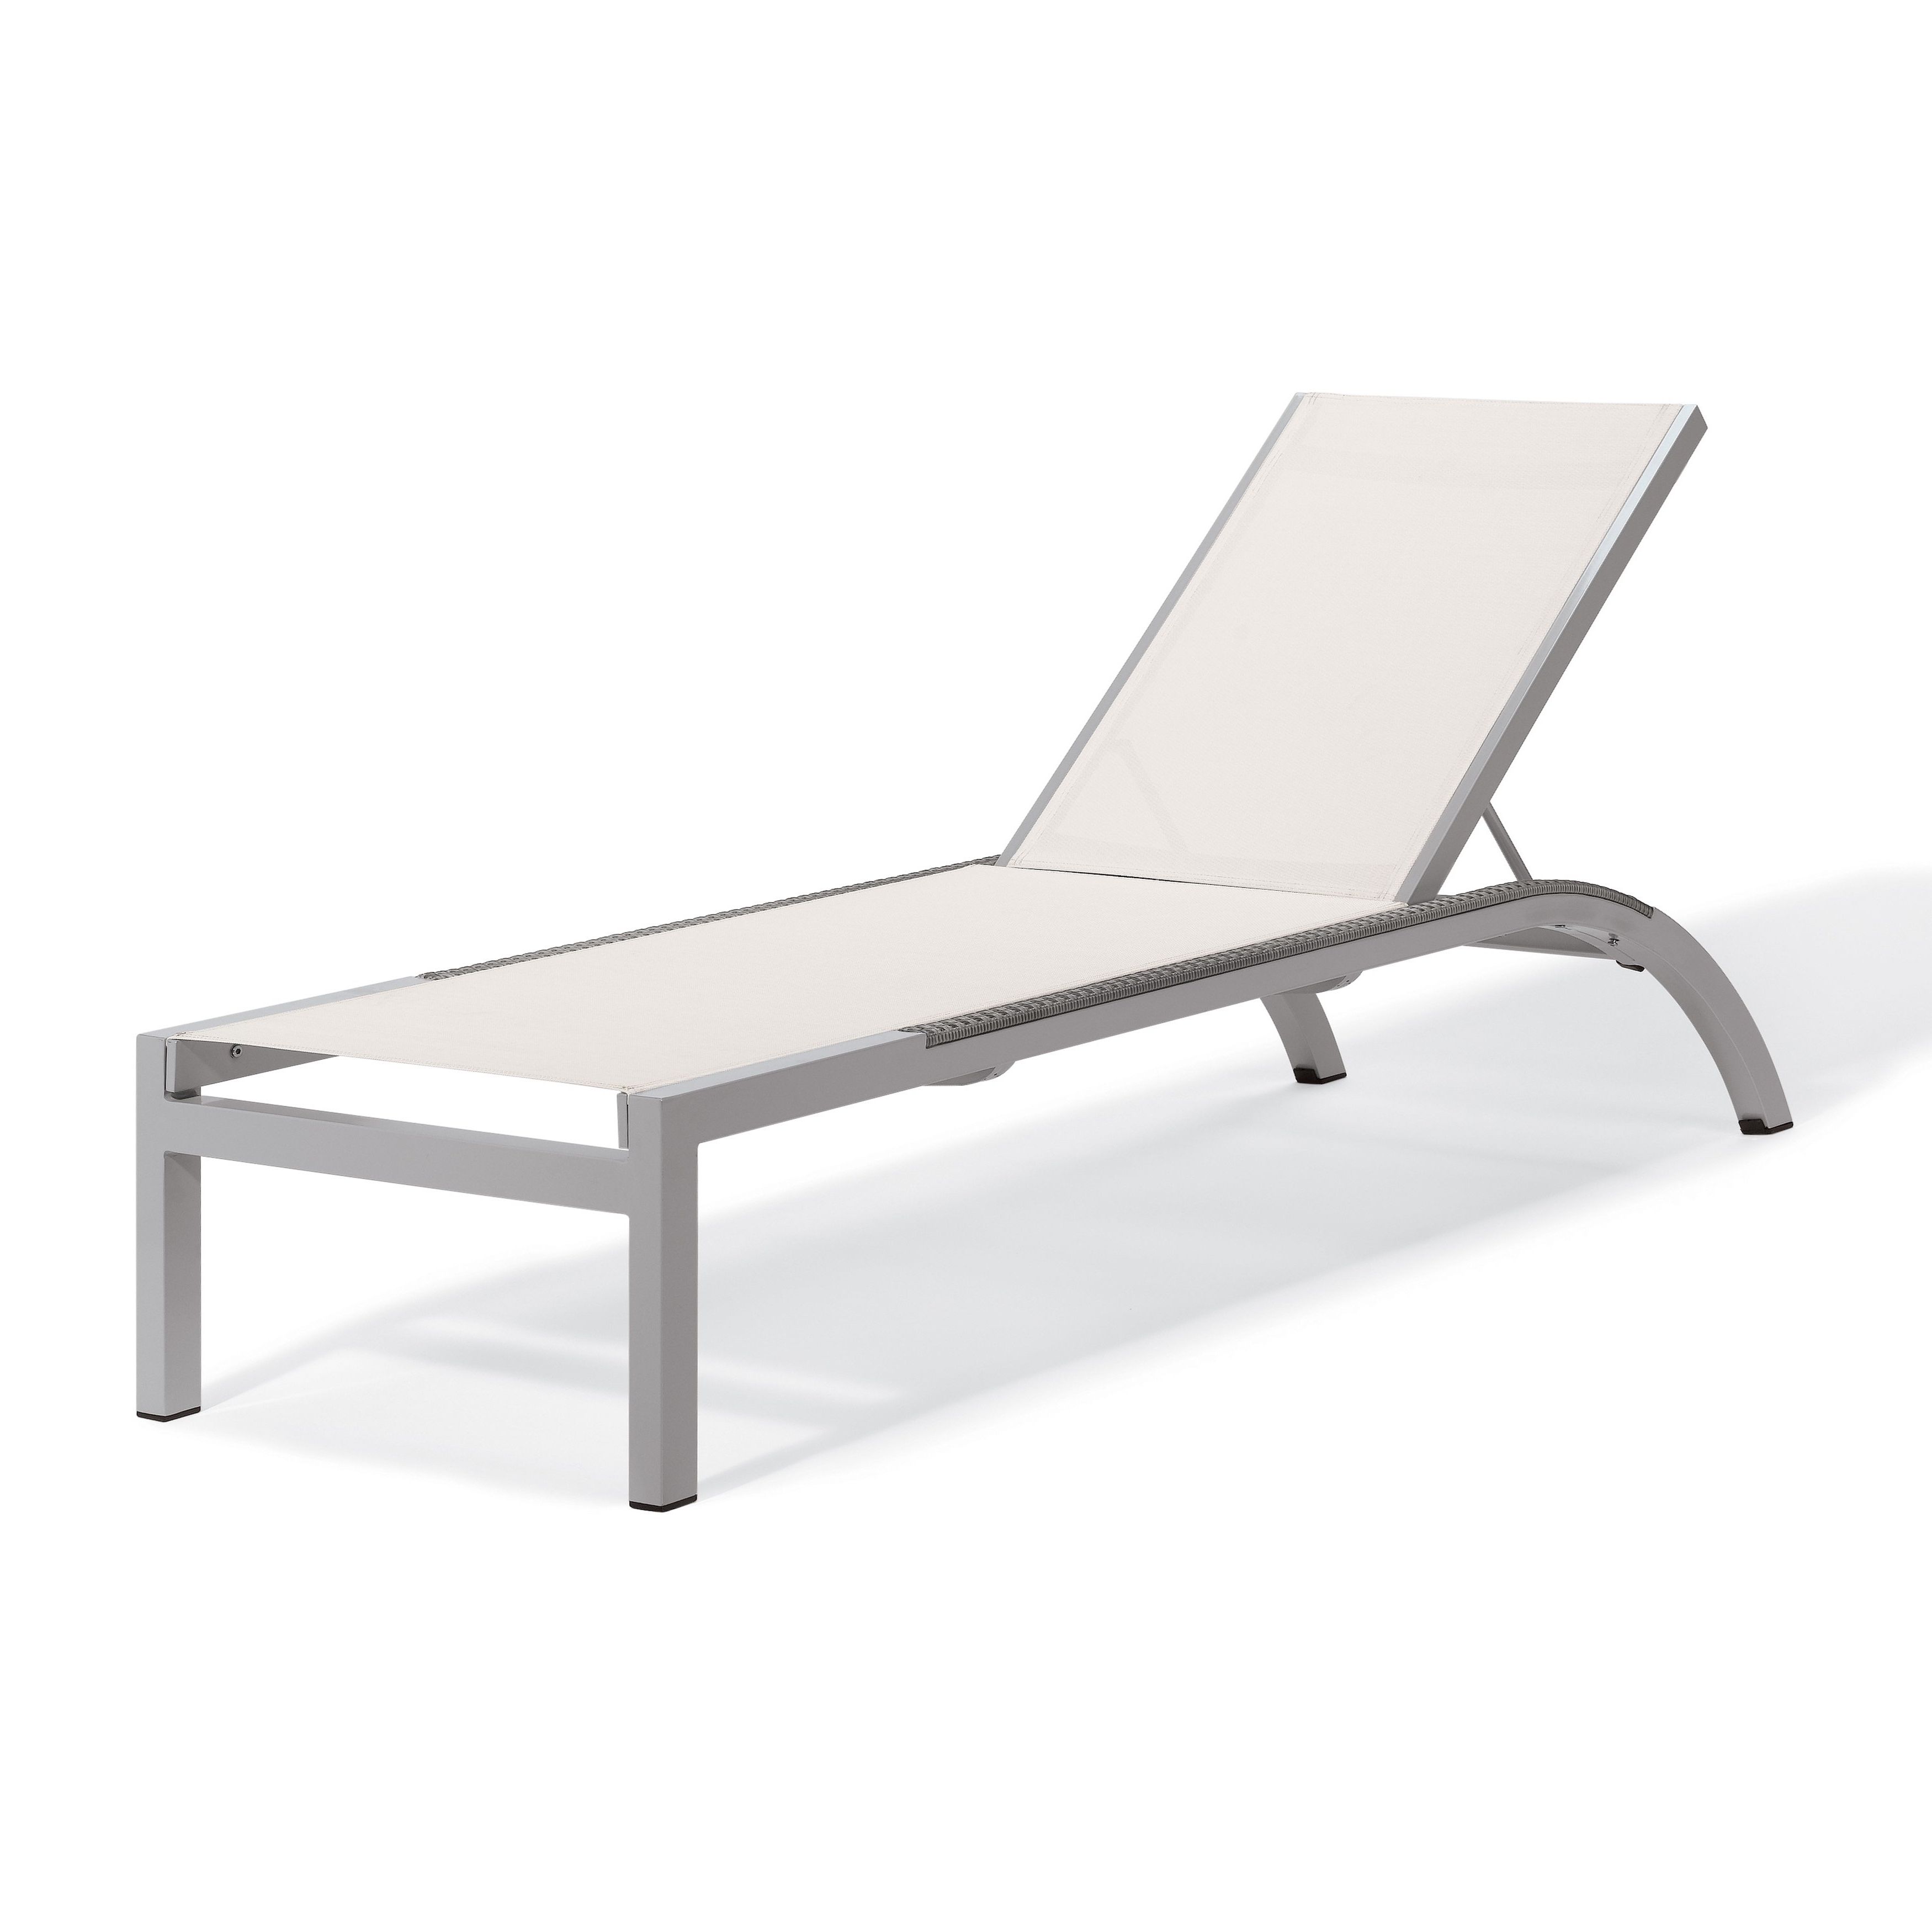 Oxford Garden Argento Armless Chaise Lounge With Powder Throughout Fashionable Myers Outdoor Aluminum Mesh Chaise Lounges (View 13 of 25)